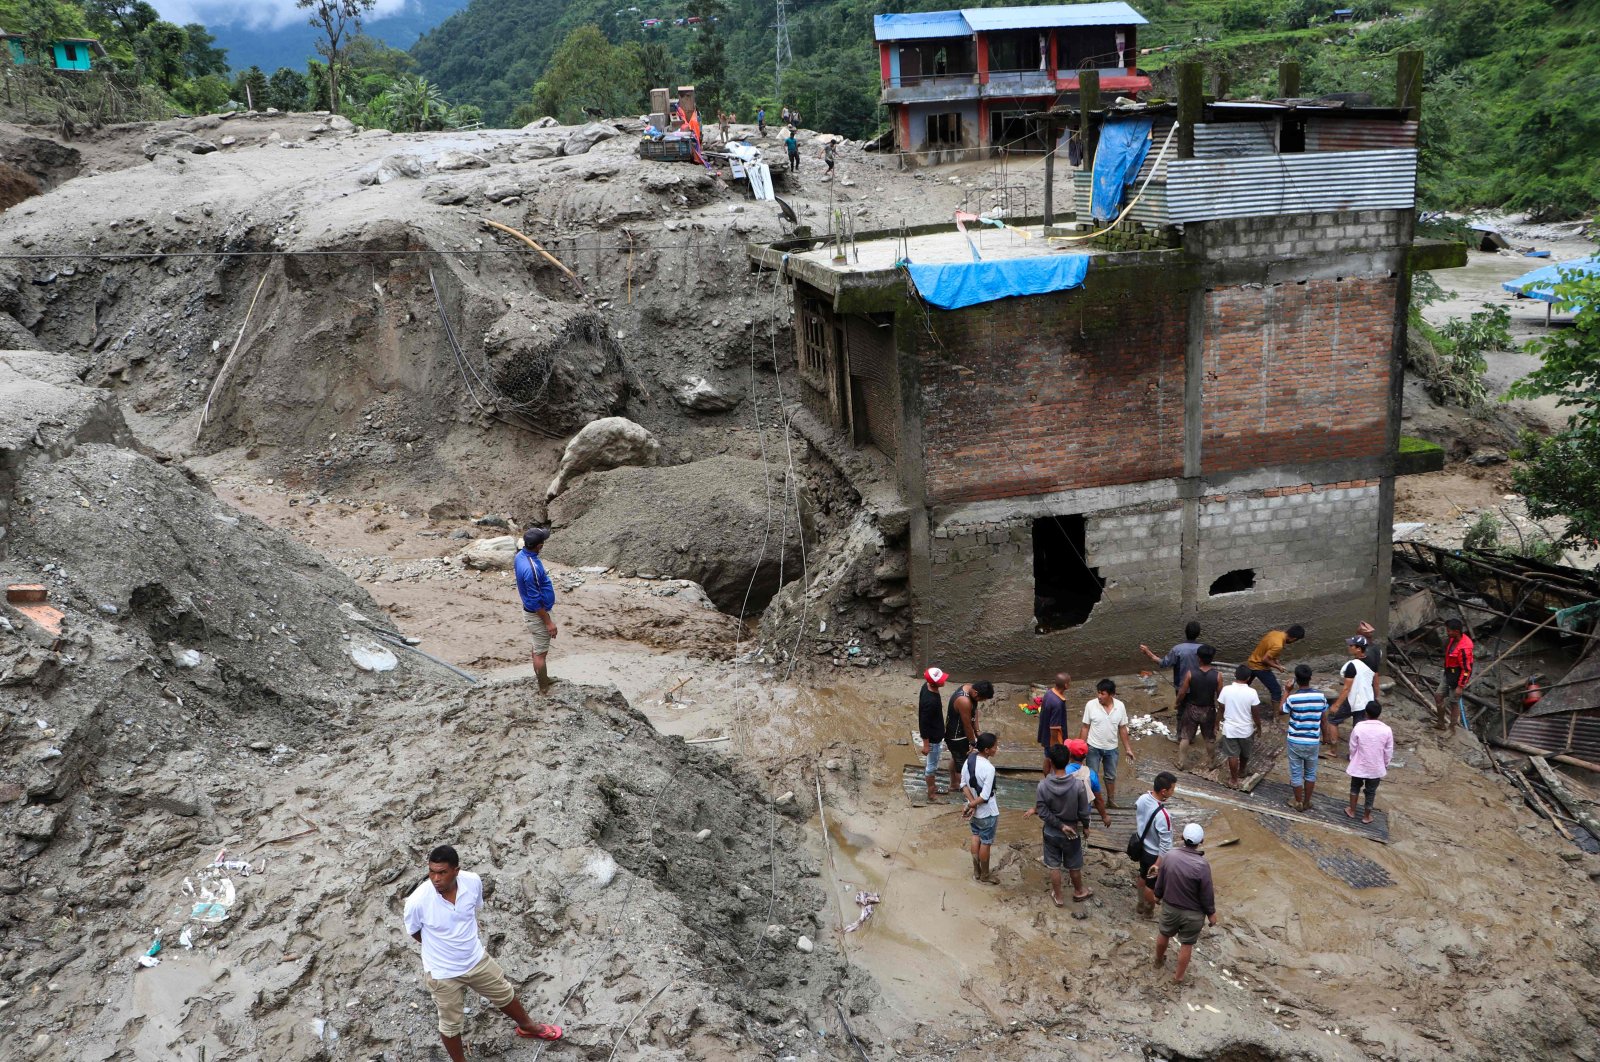 Residents and rescue workers inspect the area outside a house damaged by a landslide and the swell of the Thado-Koshi river due to heavy rains in Jambu village of Sindhupalchok district, some 80 kilometers northeast of Kathmandu, Nepal, July 9, 2020. (AFP Photo)